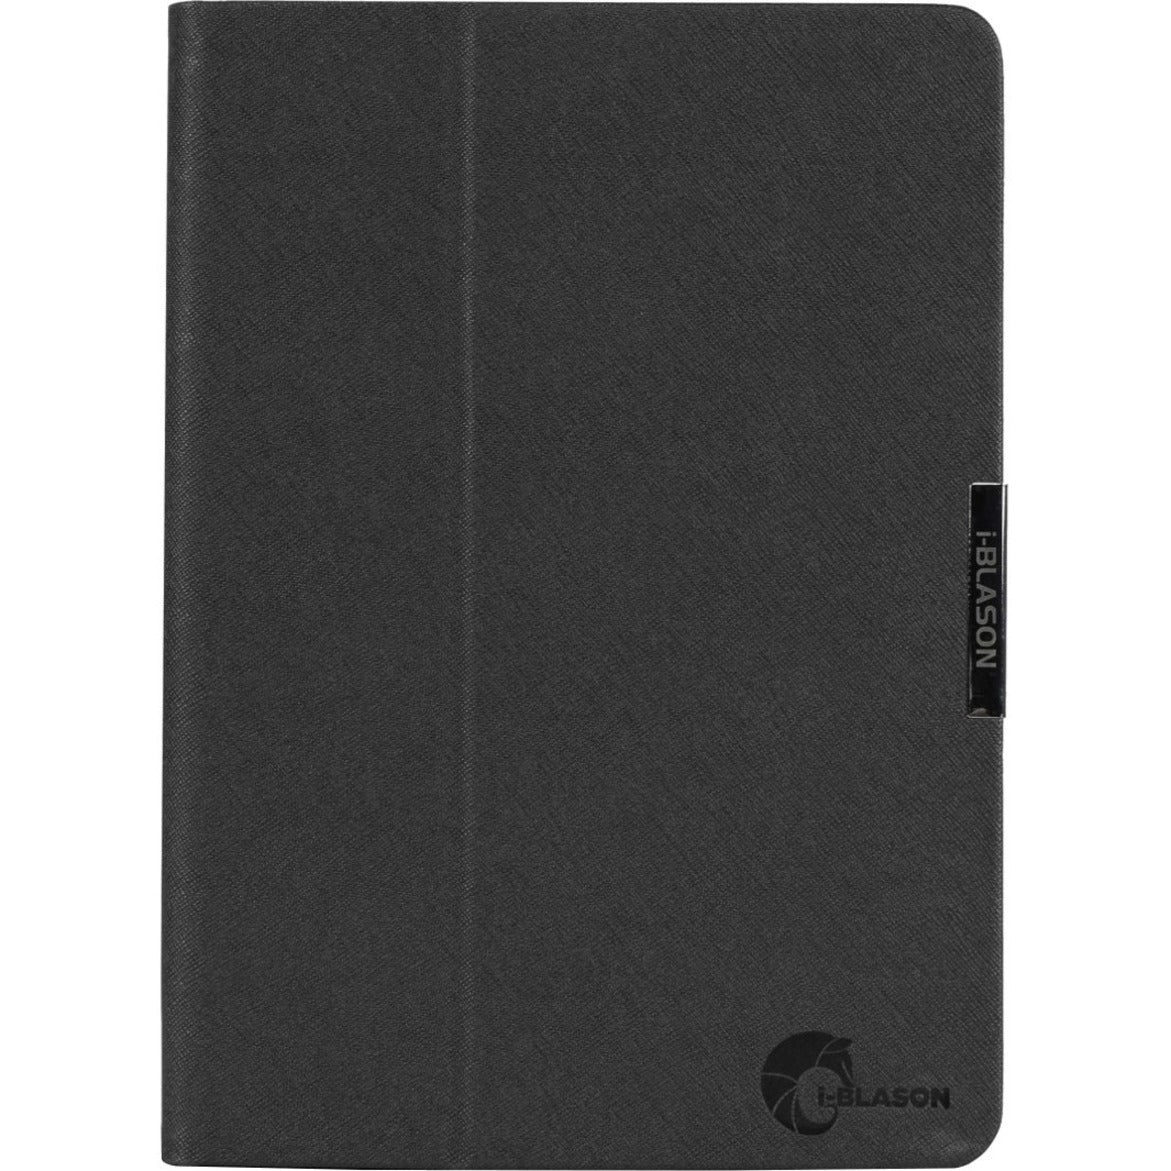 i-Blason Executive Carrying Case for 10.1" Tablet - Black